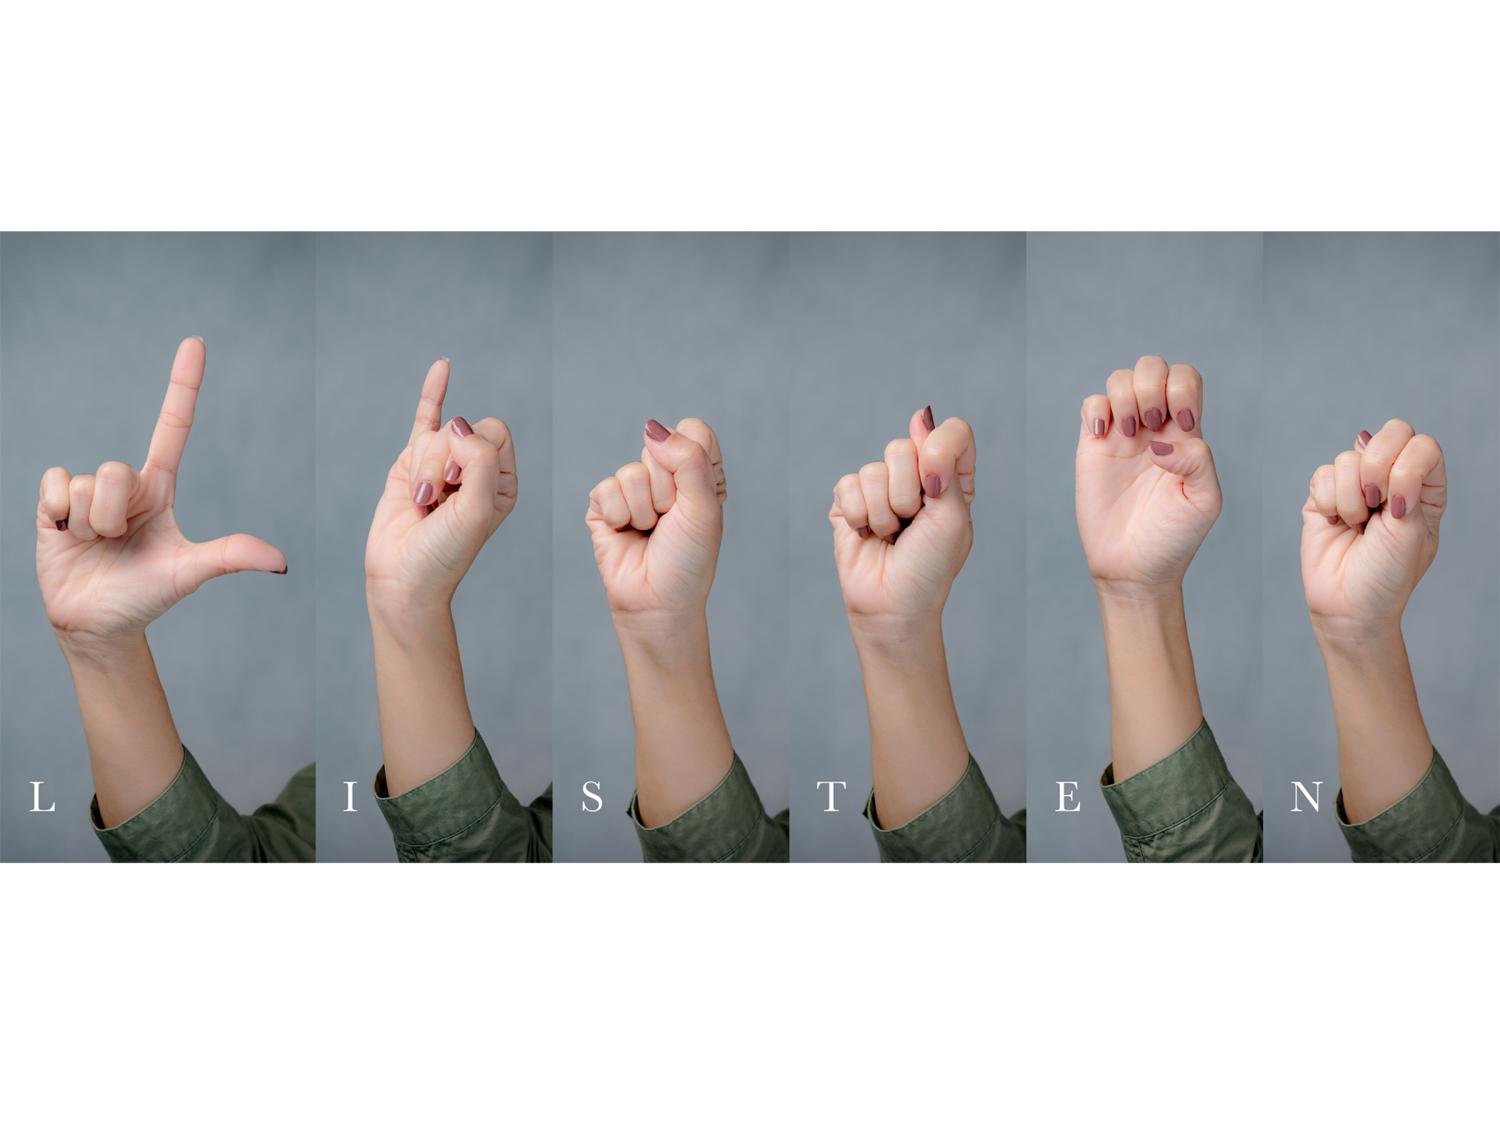 Hands gesturing using sign language to spell the word “listen”.